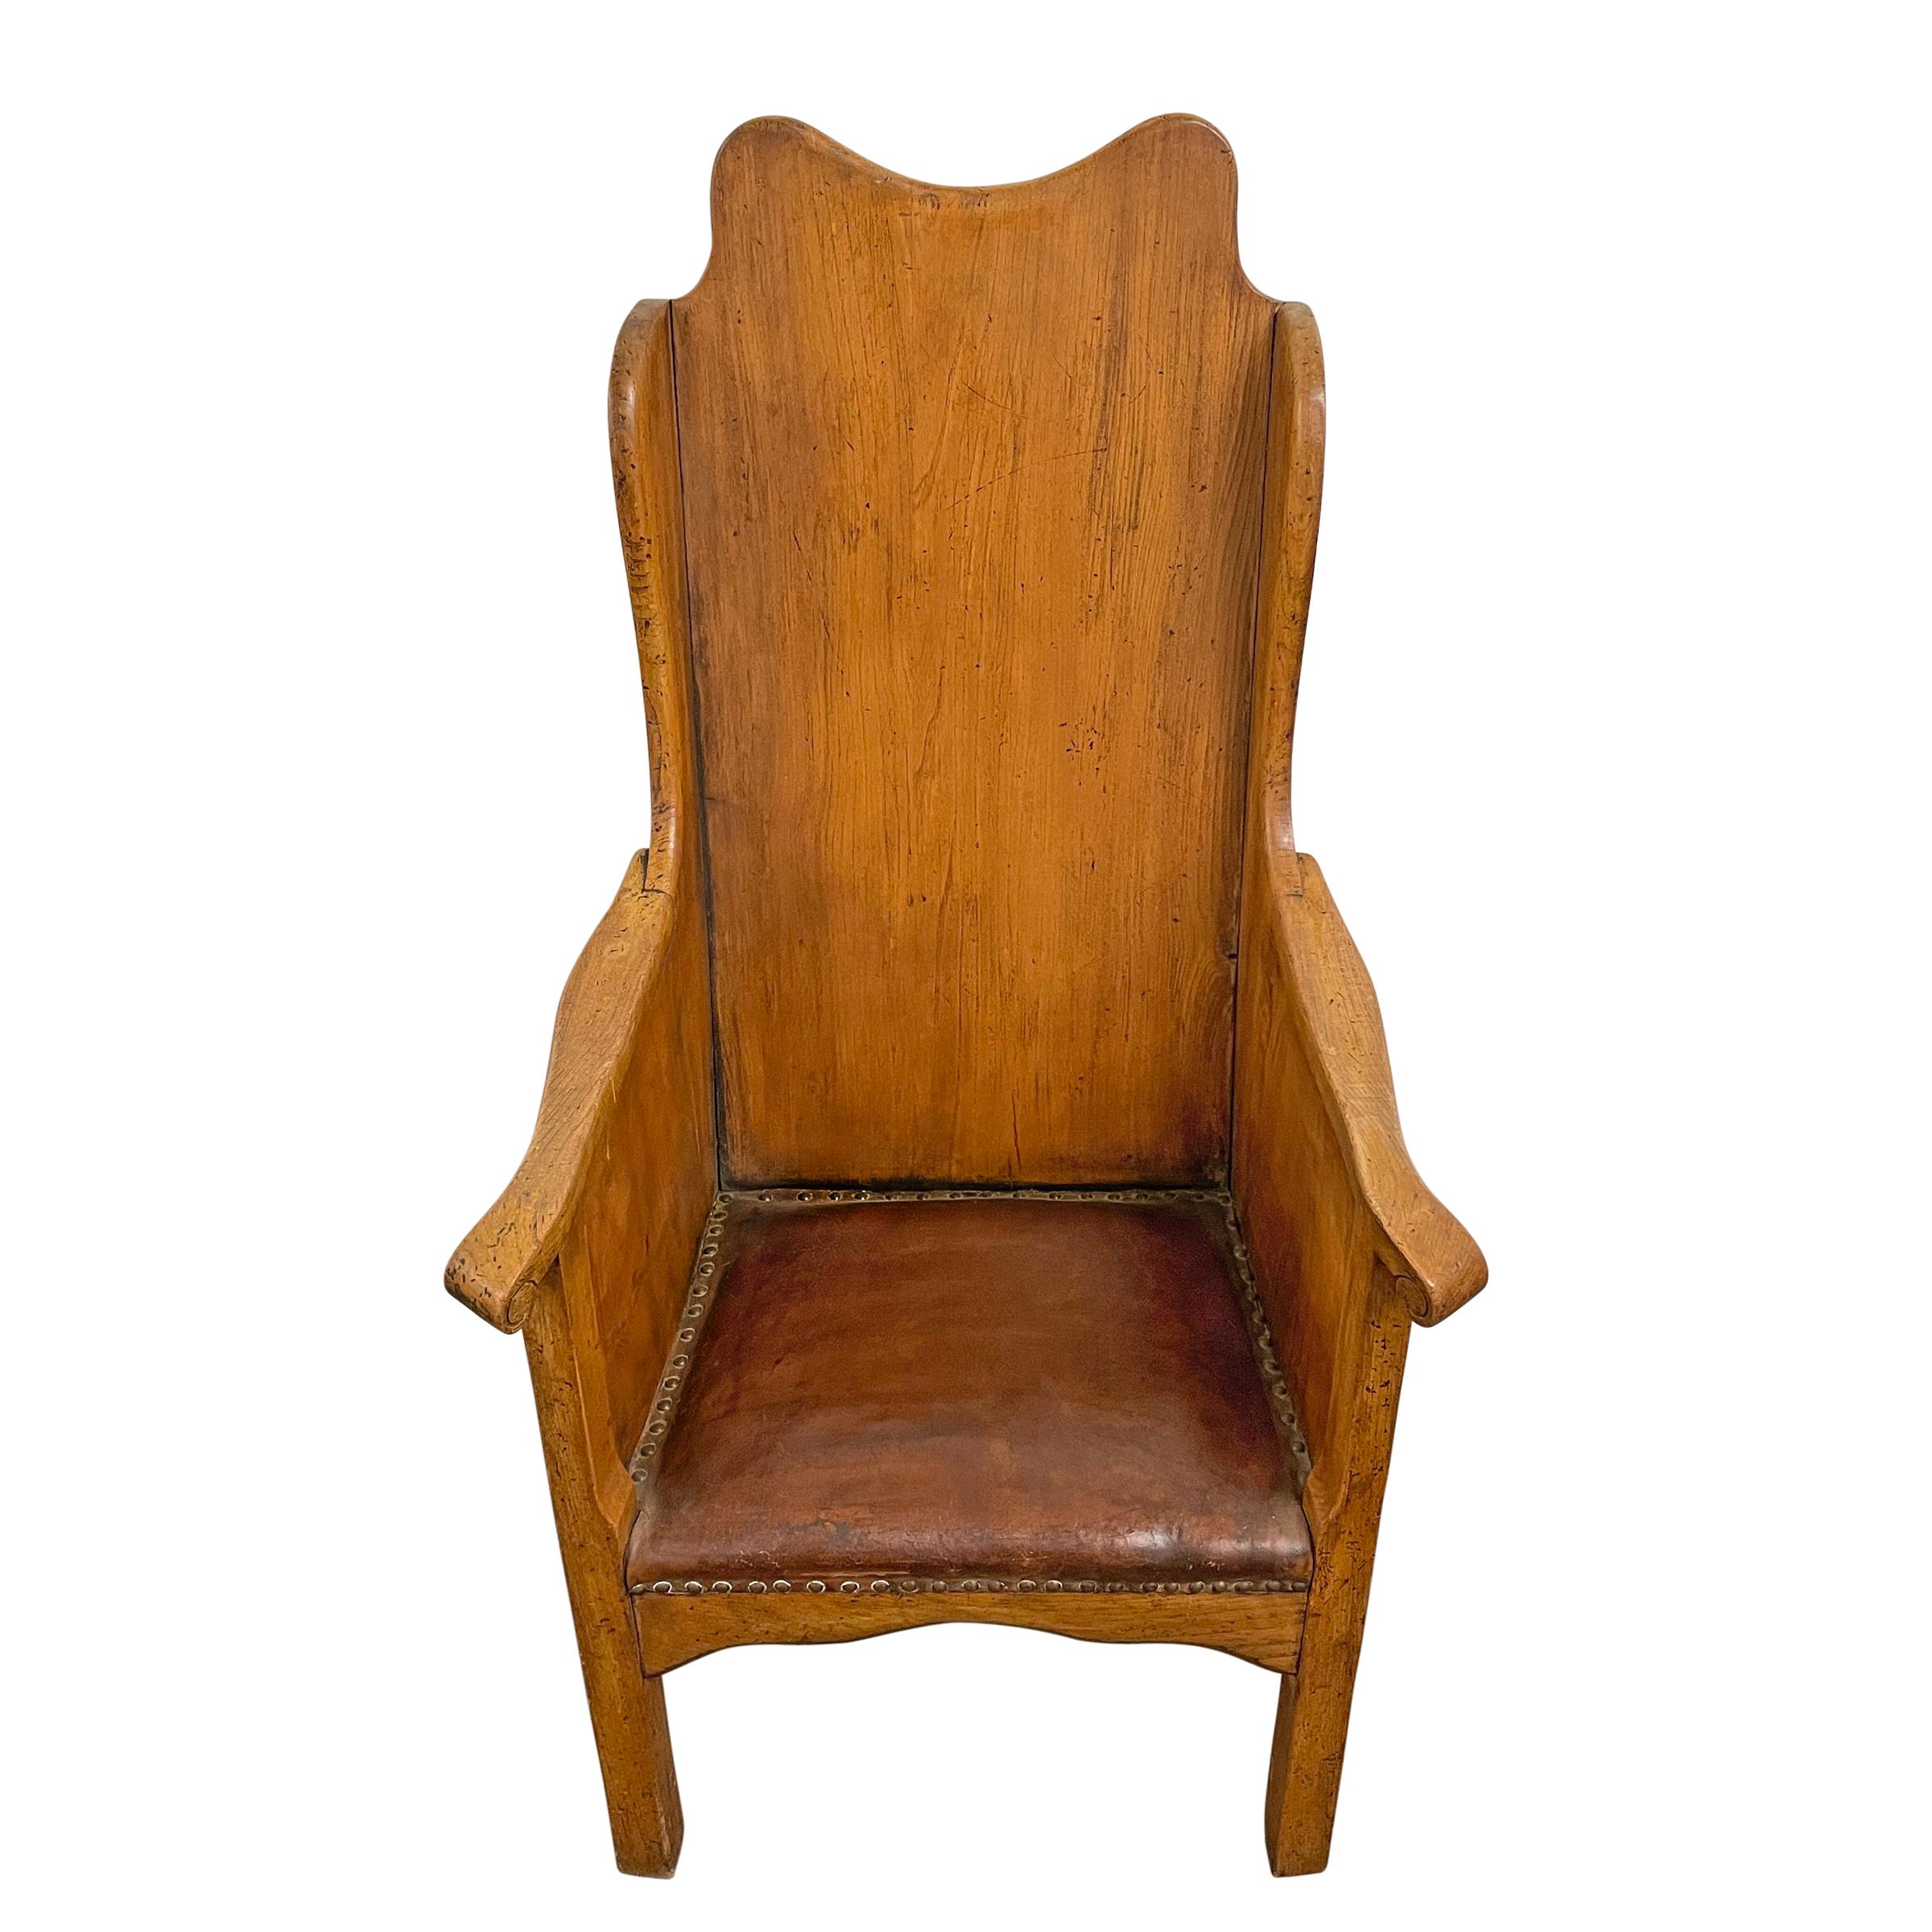 A wonderful late 19th century English Arts & Crafts hall chair with short wings, a scrolled top, out-turned sloping arms, and retaining its original leather upholstered seat with brass nailhead trim.